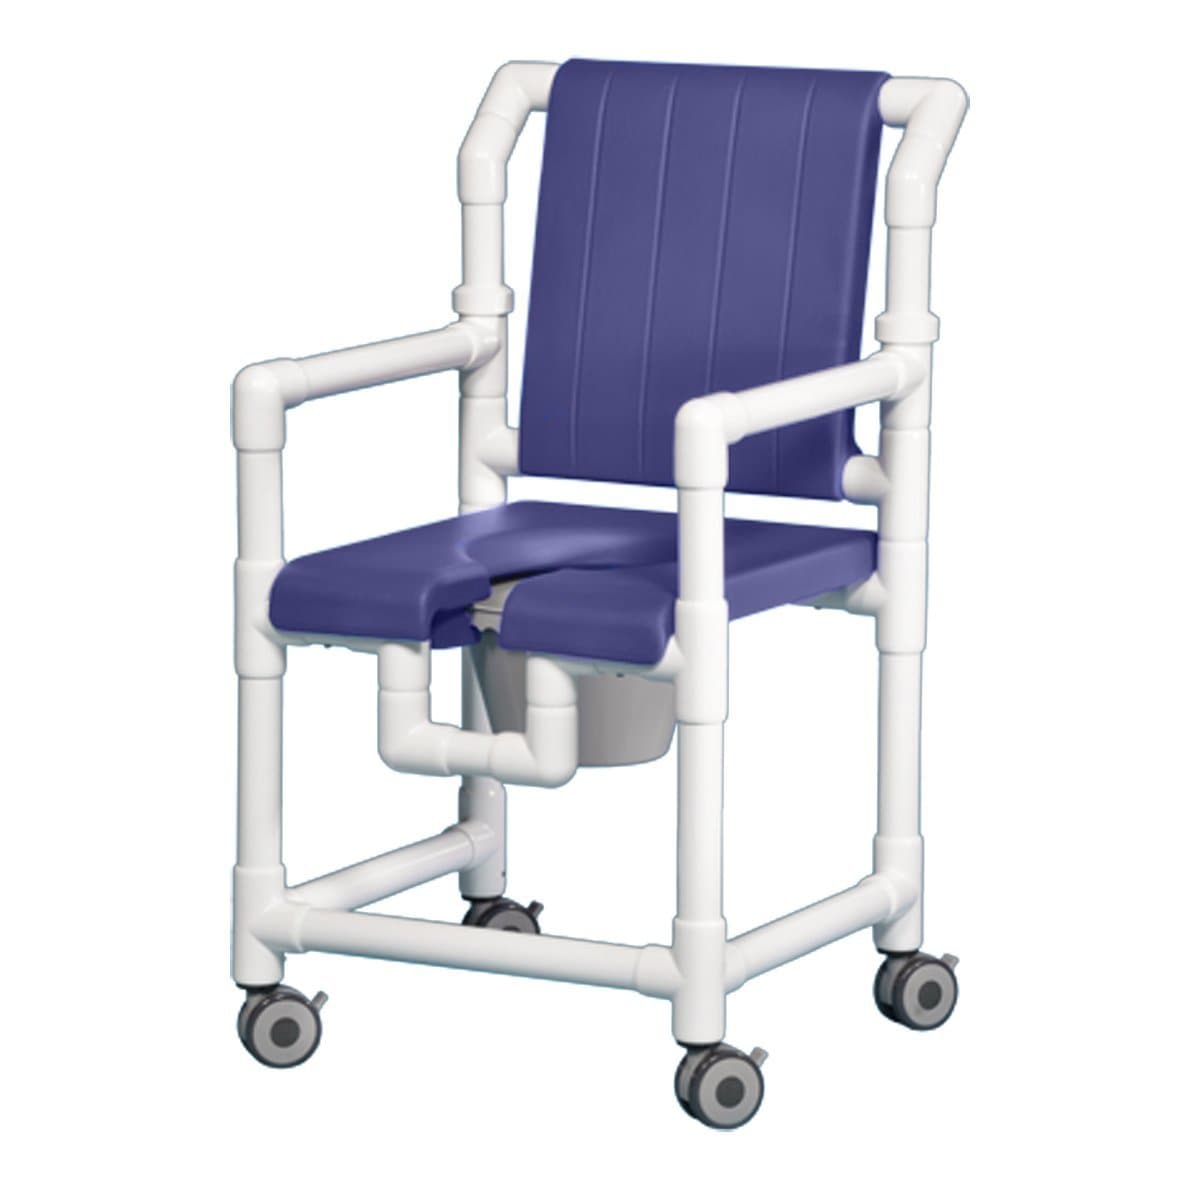 IPU Deluxe PVC Rolling Shower Chair Commode with Open Front Seat - Senior.com PVC Shower Chairs